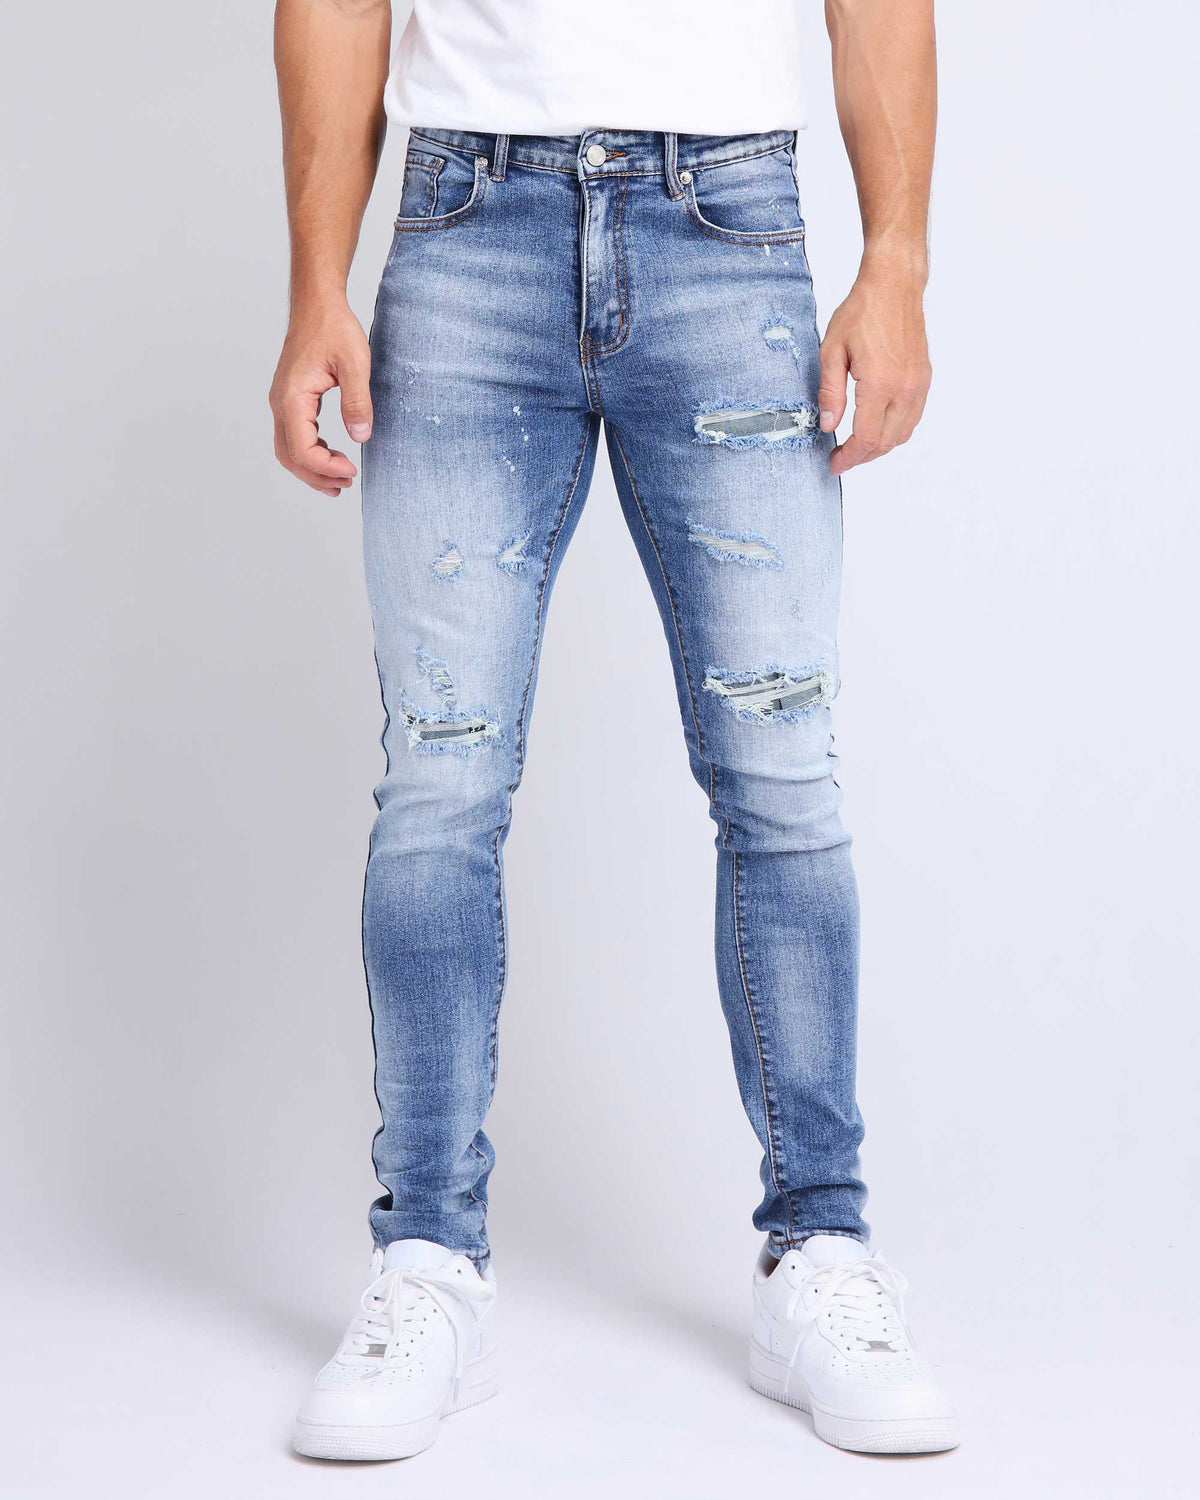 LOGEQI Irregular Wash Spray Paint Blue Ripped Jeans